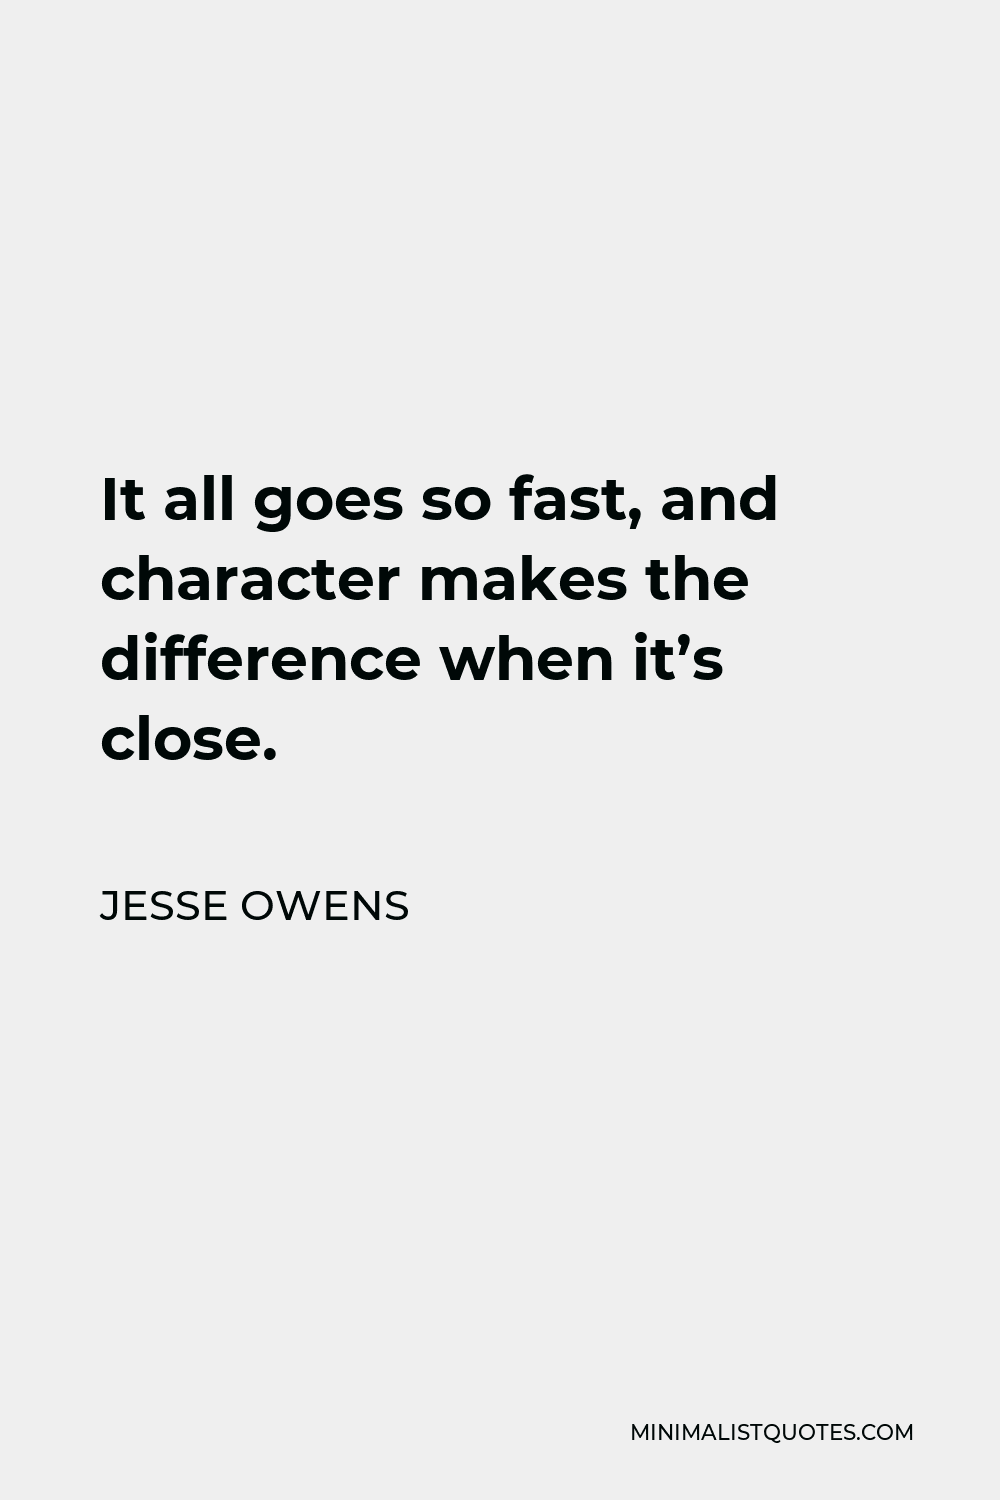 Jesse Owens Quote - It all goes so fast, and character makes the difference when it’s close.